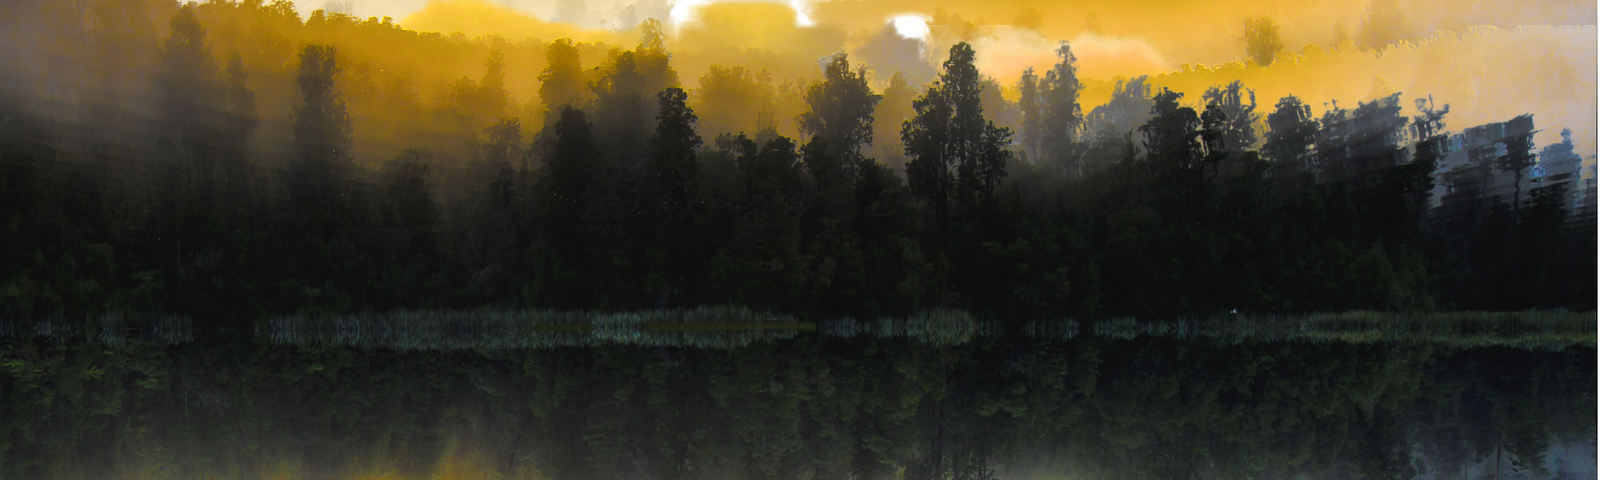 An abstract image of dark coniferous trees reflected in the water. The edges above the trees and their reflections are yellow.